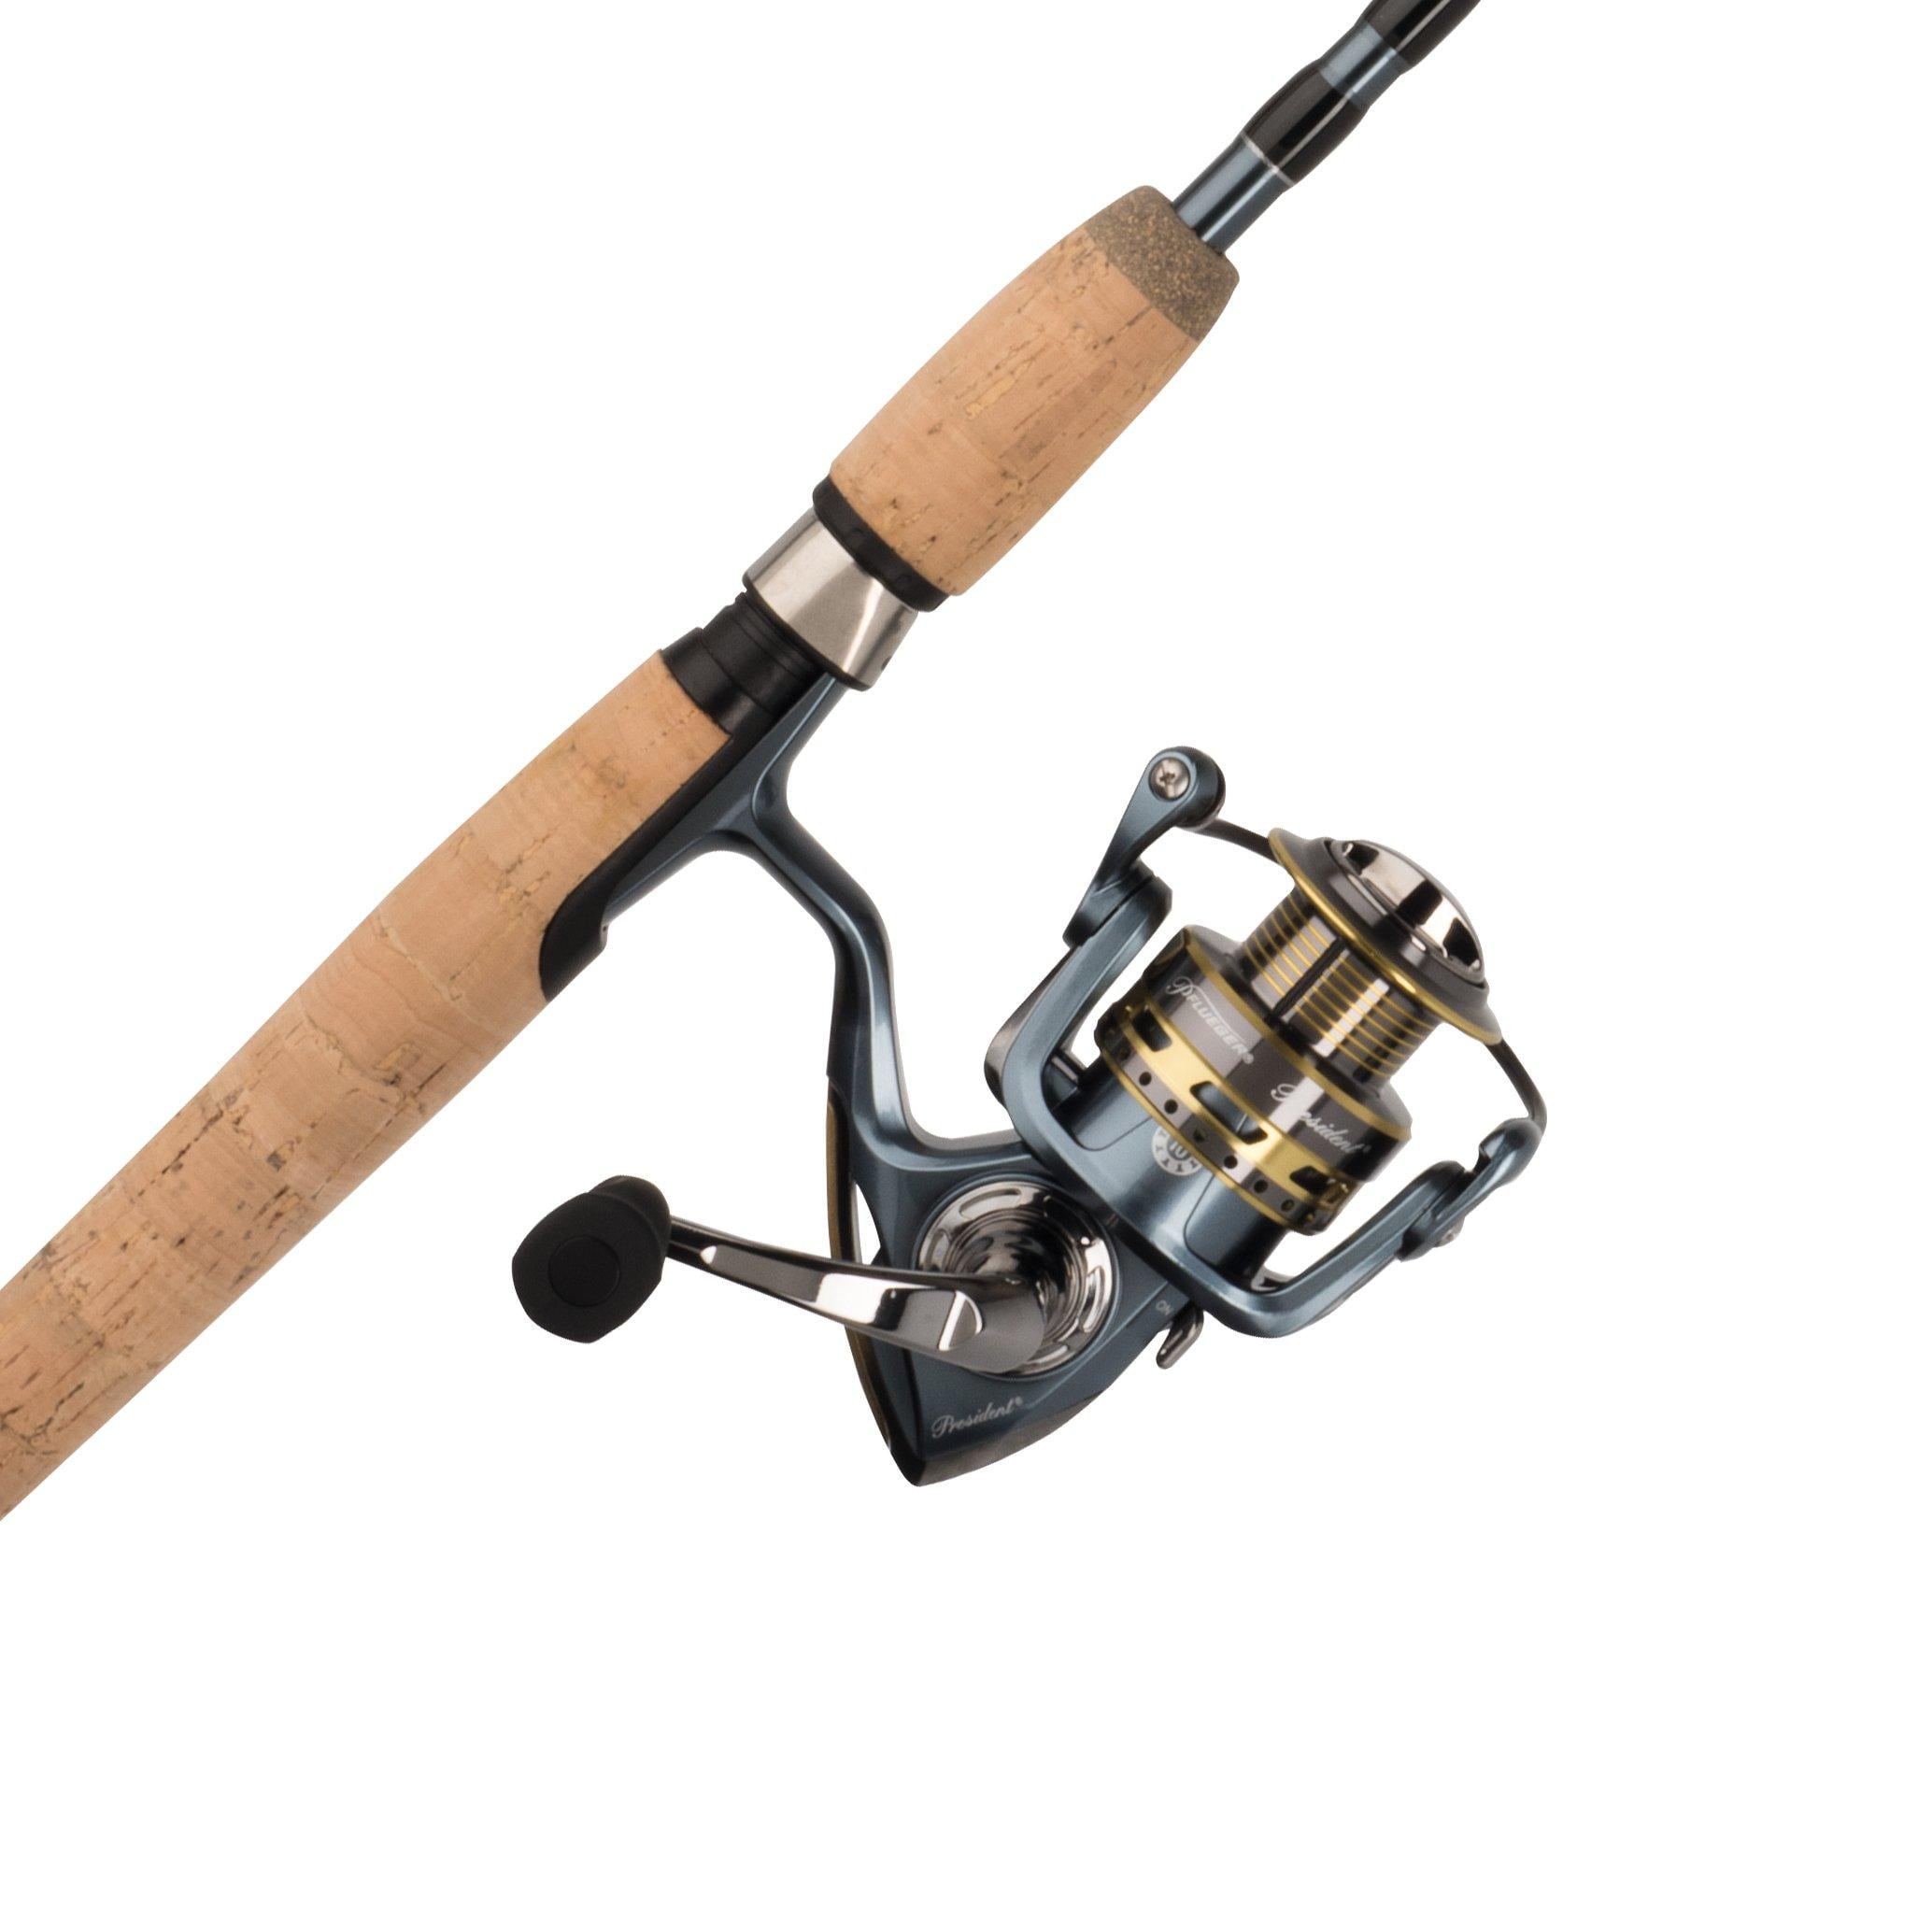 Reel Without Line 1pc Medium Action for sale online Pflueger Trion Spinning Combo 35 Sz 7 Brg 